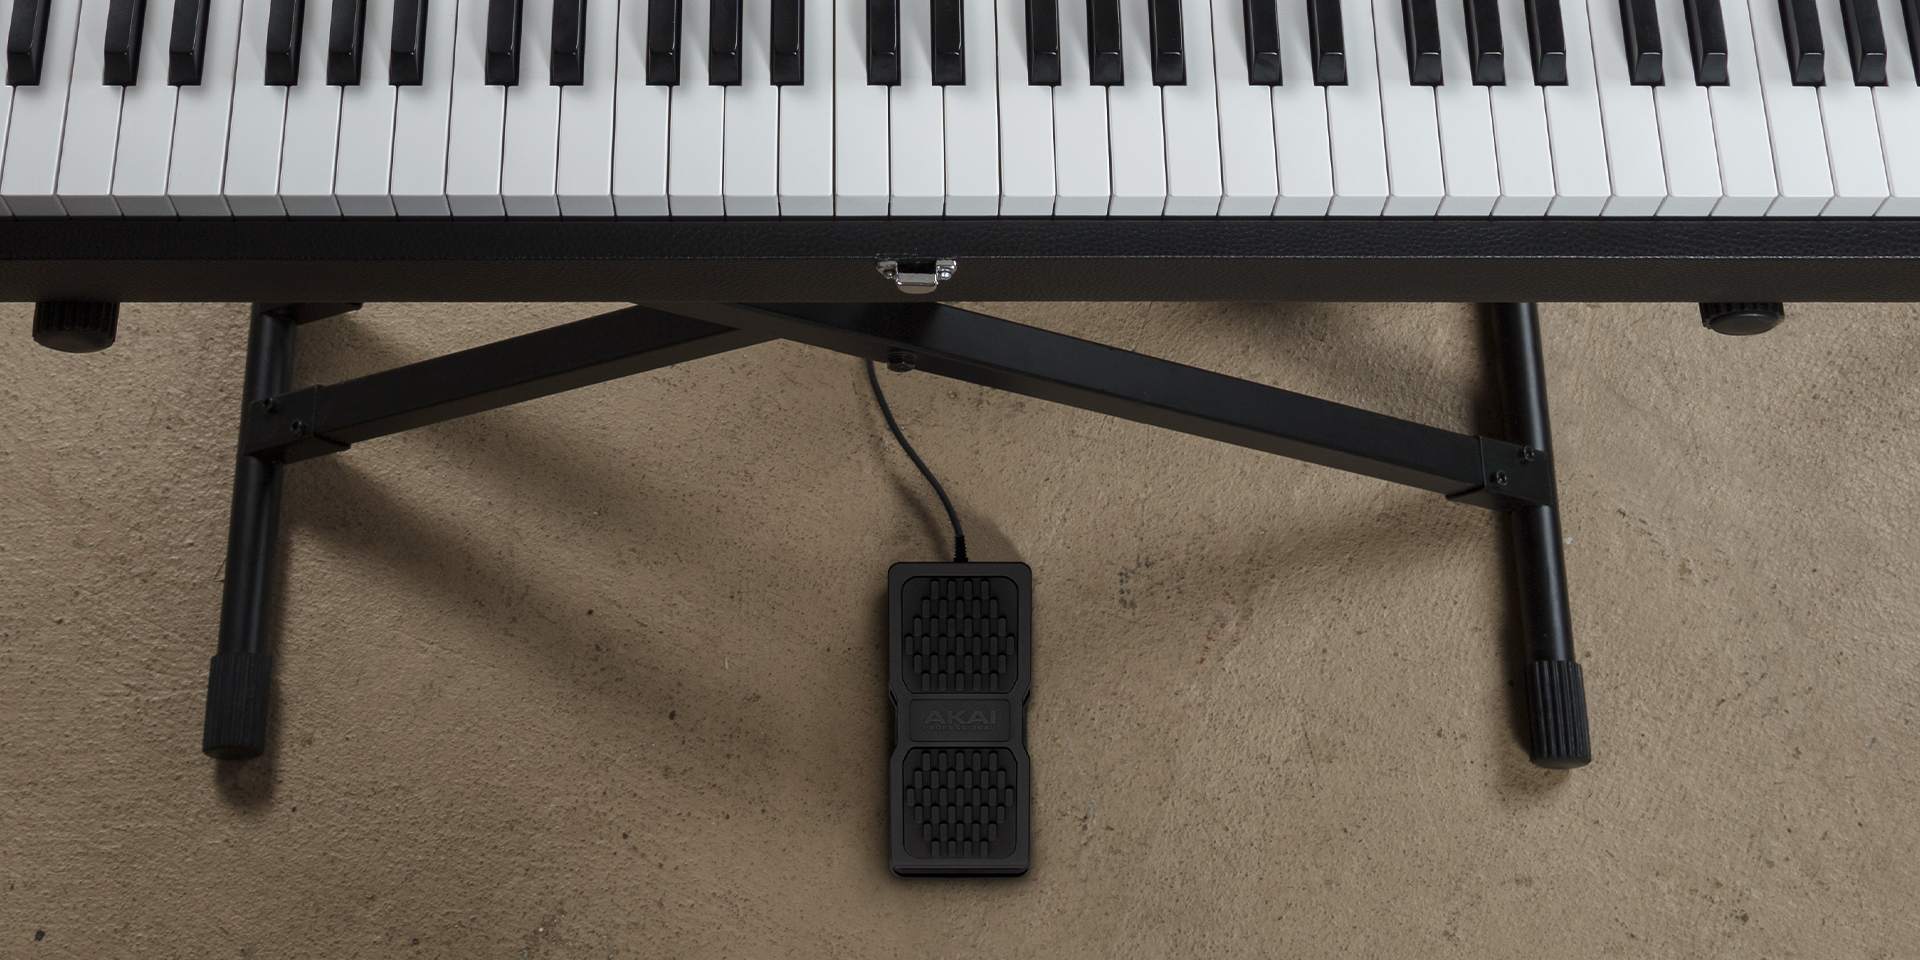 Composed wide shot of 88 key keyboard with expression pedal visible underneath